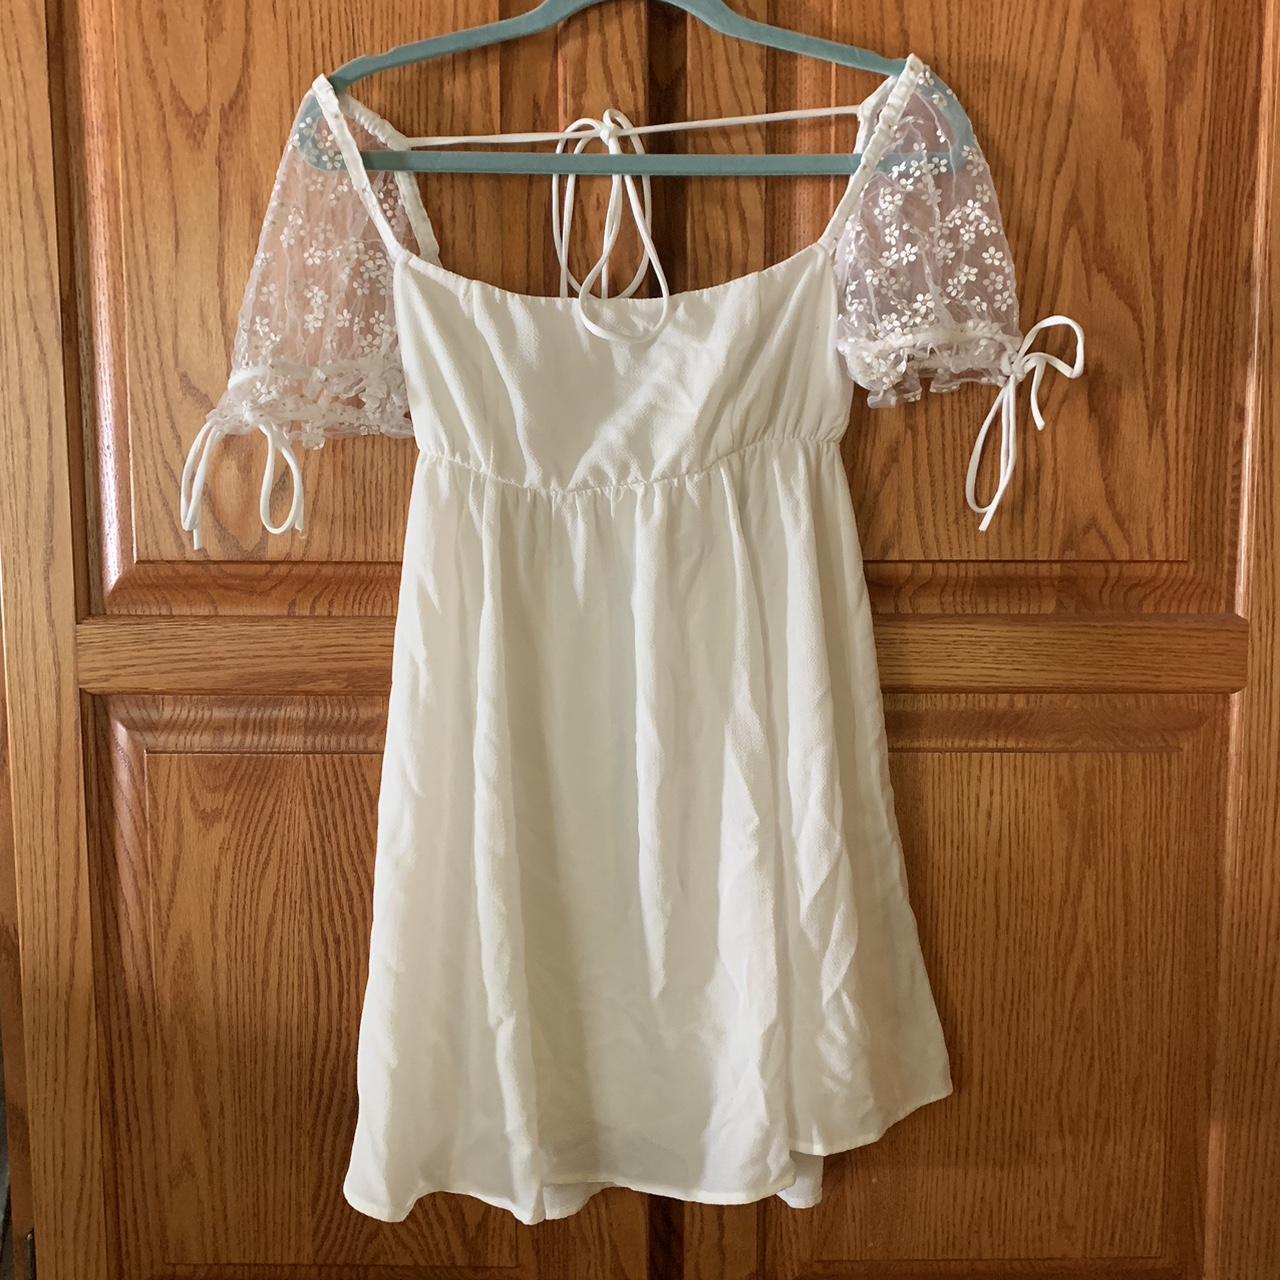 Small Lucy in the Sky Babydoll Sunflower/White Dress - Depop